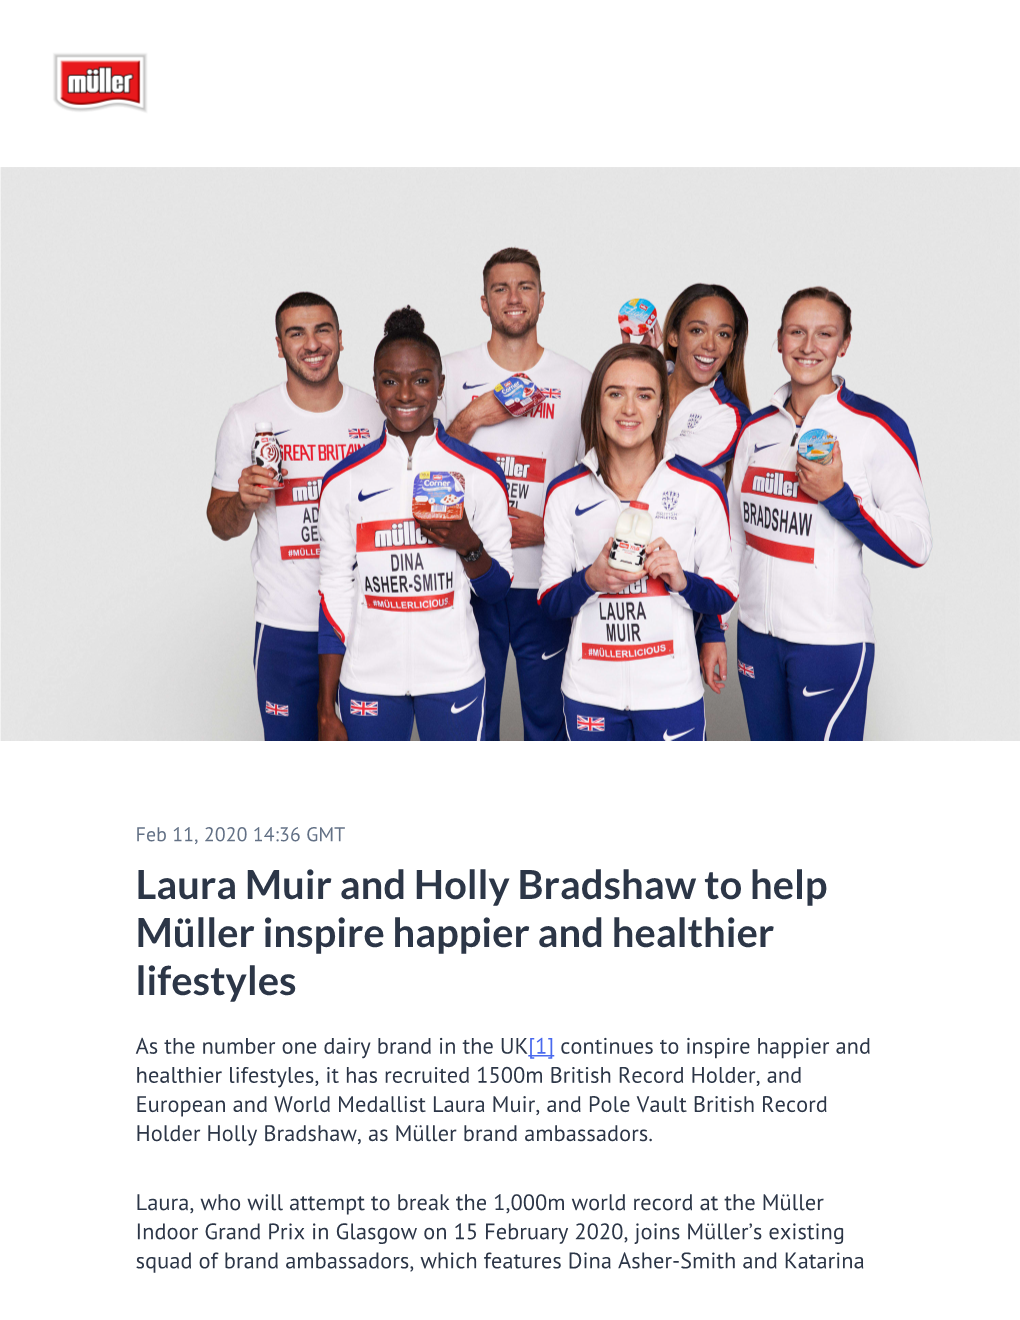 Laura Muir and Holly Bradshaw to Help Müller Inspire Happier and Healthier Lifestyles